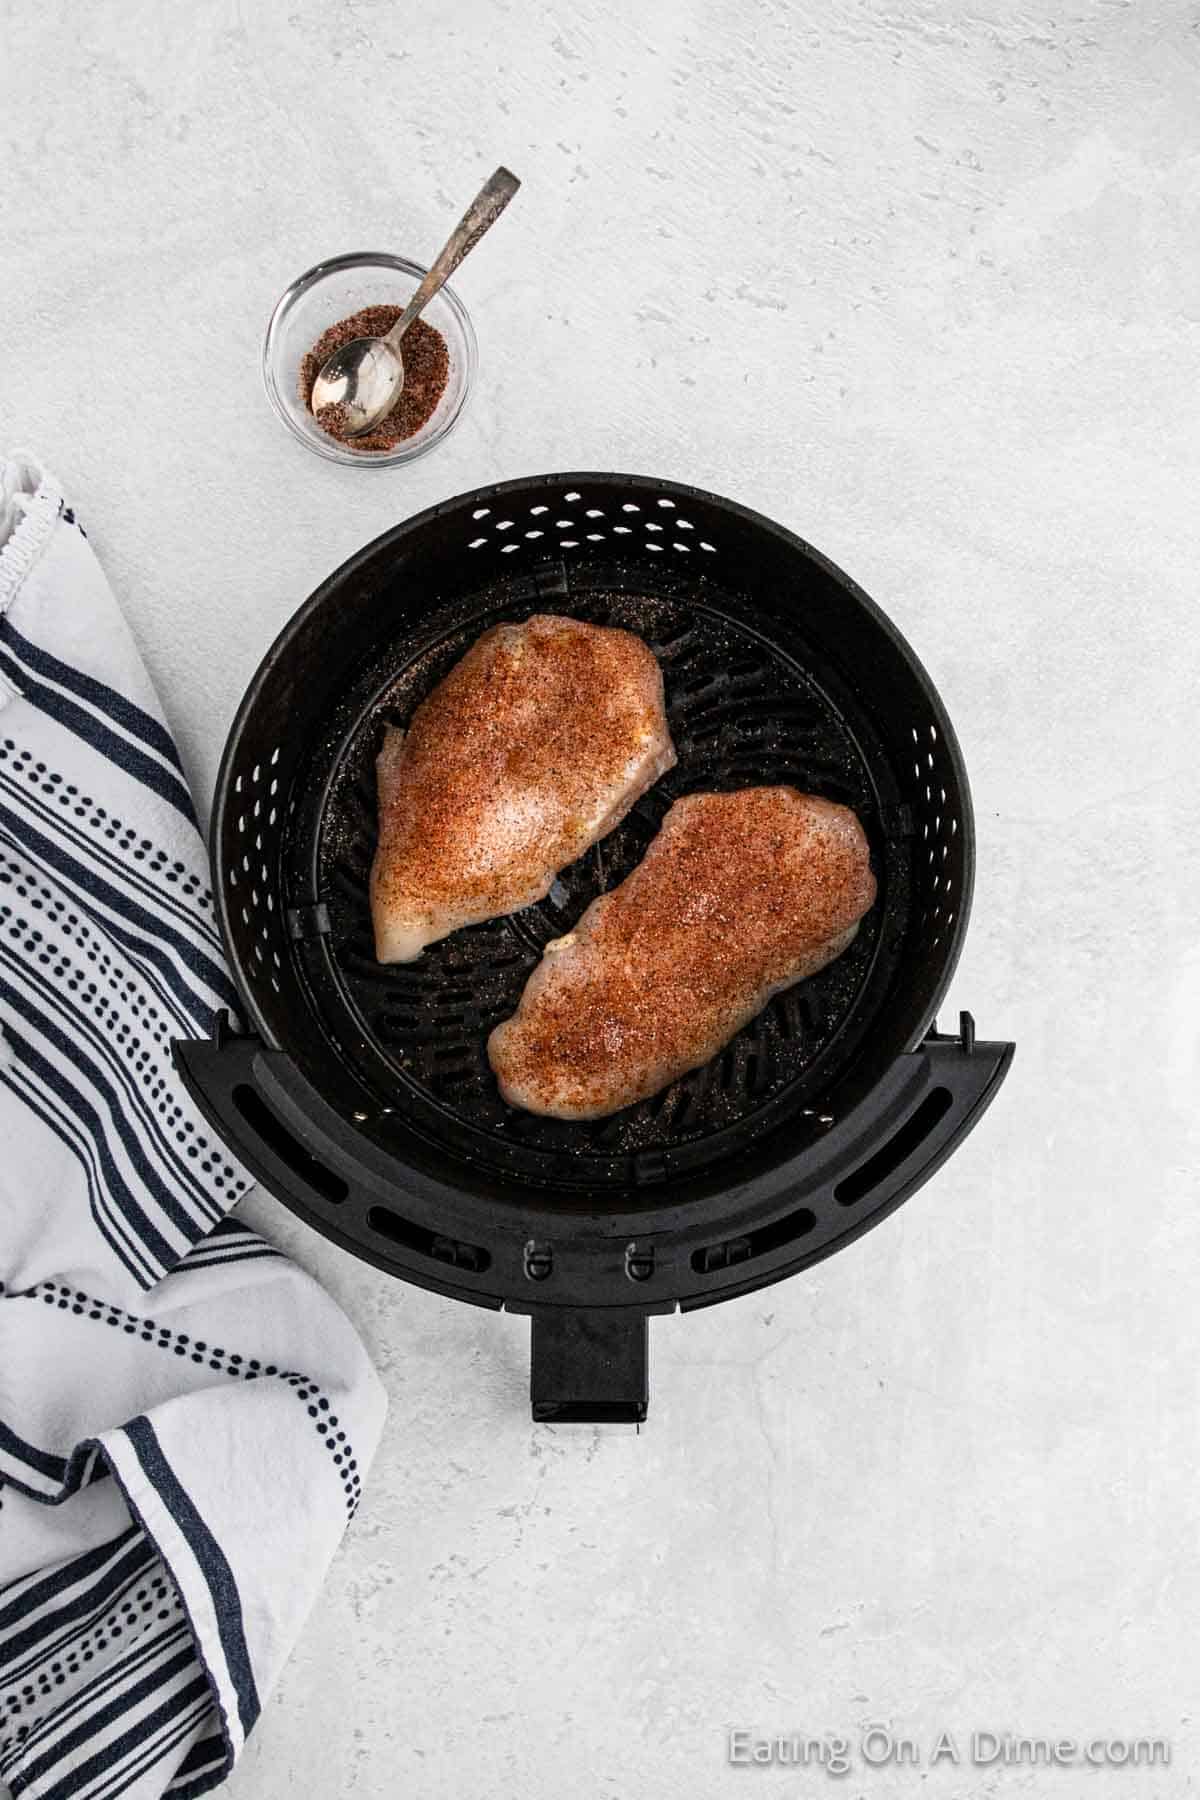 Toping the chicken breast in the air fryer basket with the seasoning blend